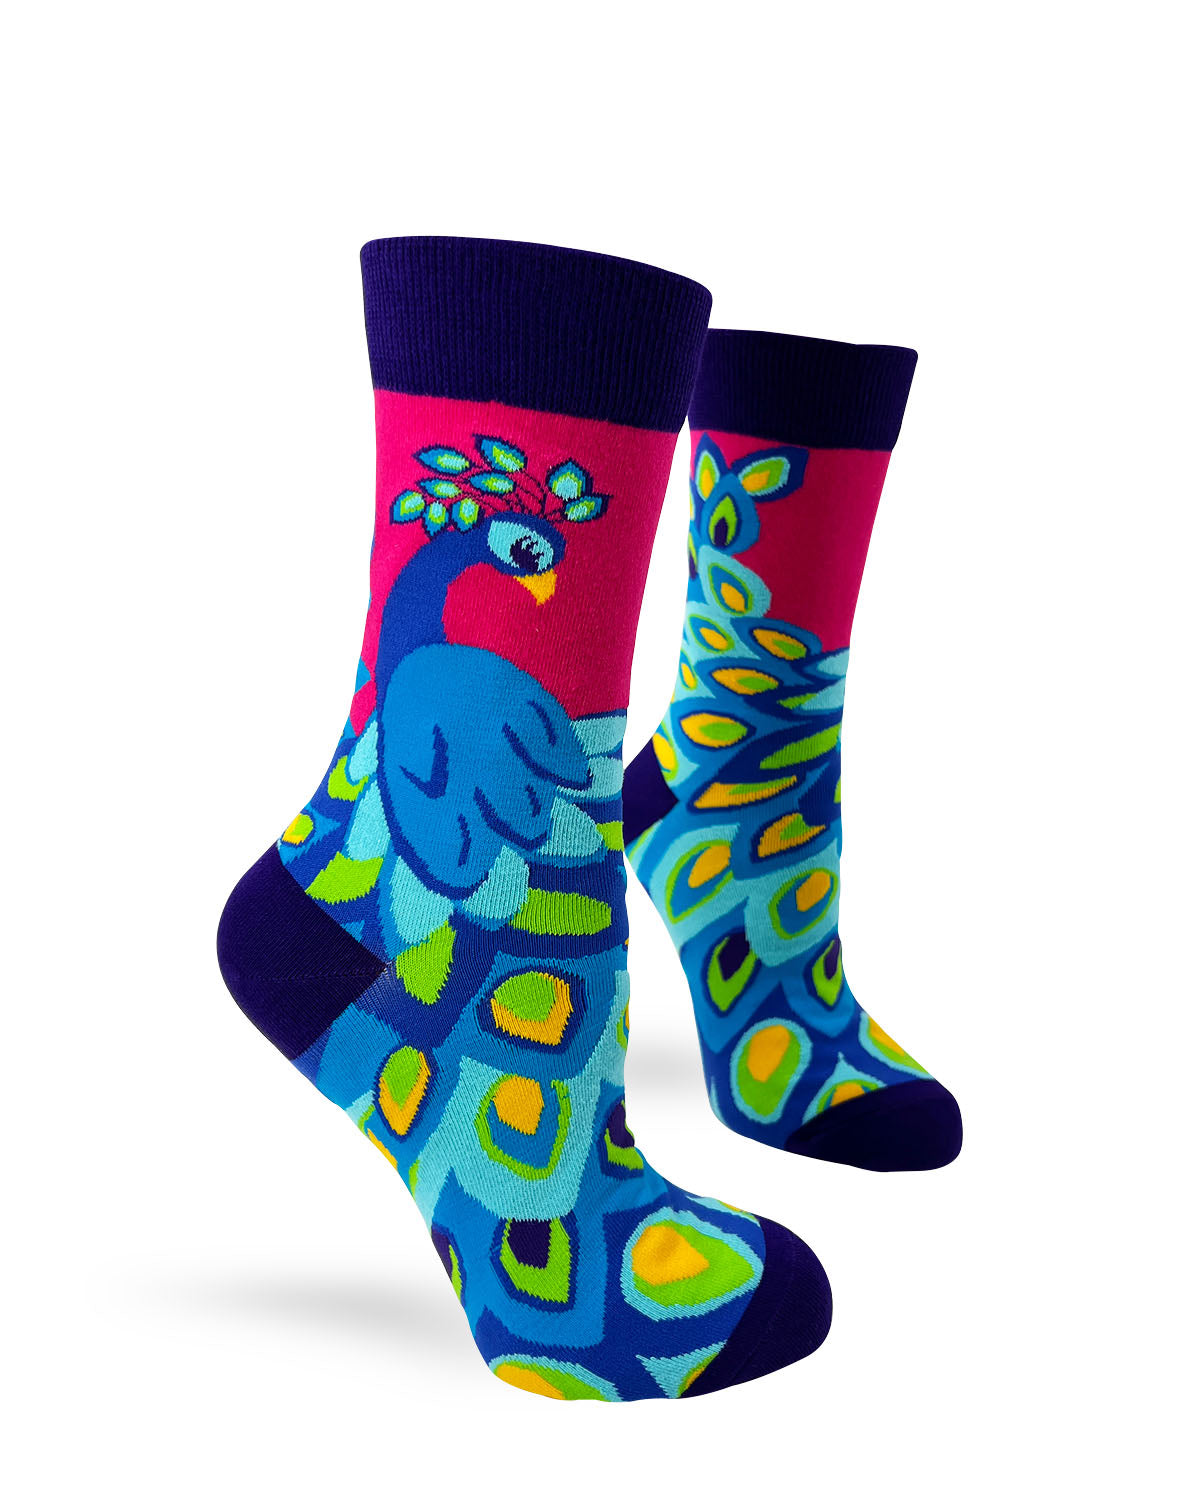 Novelty crew socks featuring a peacock.